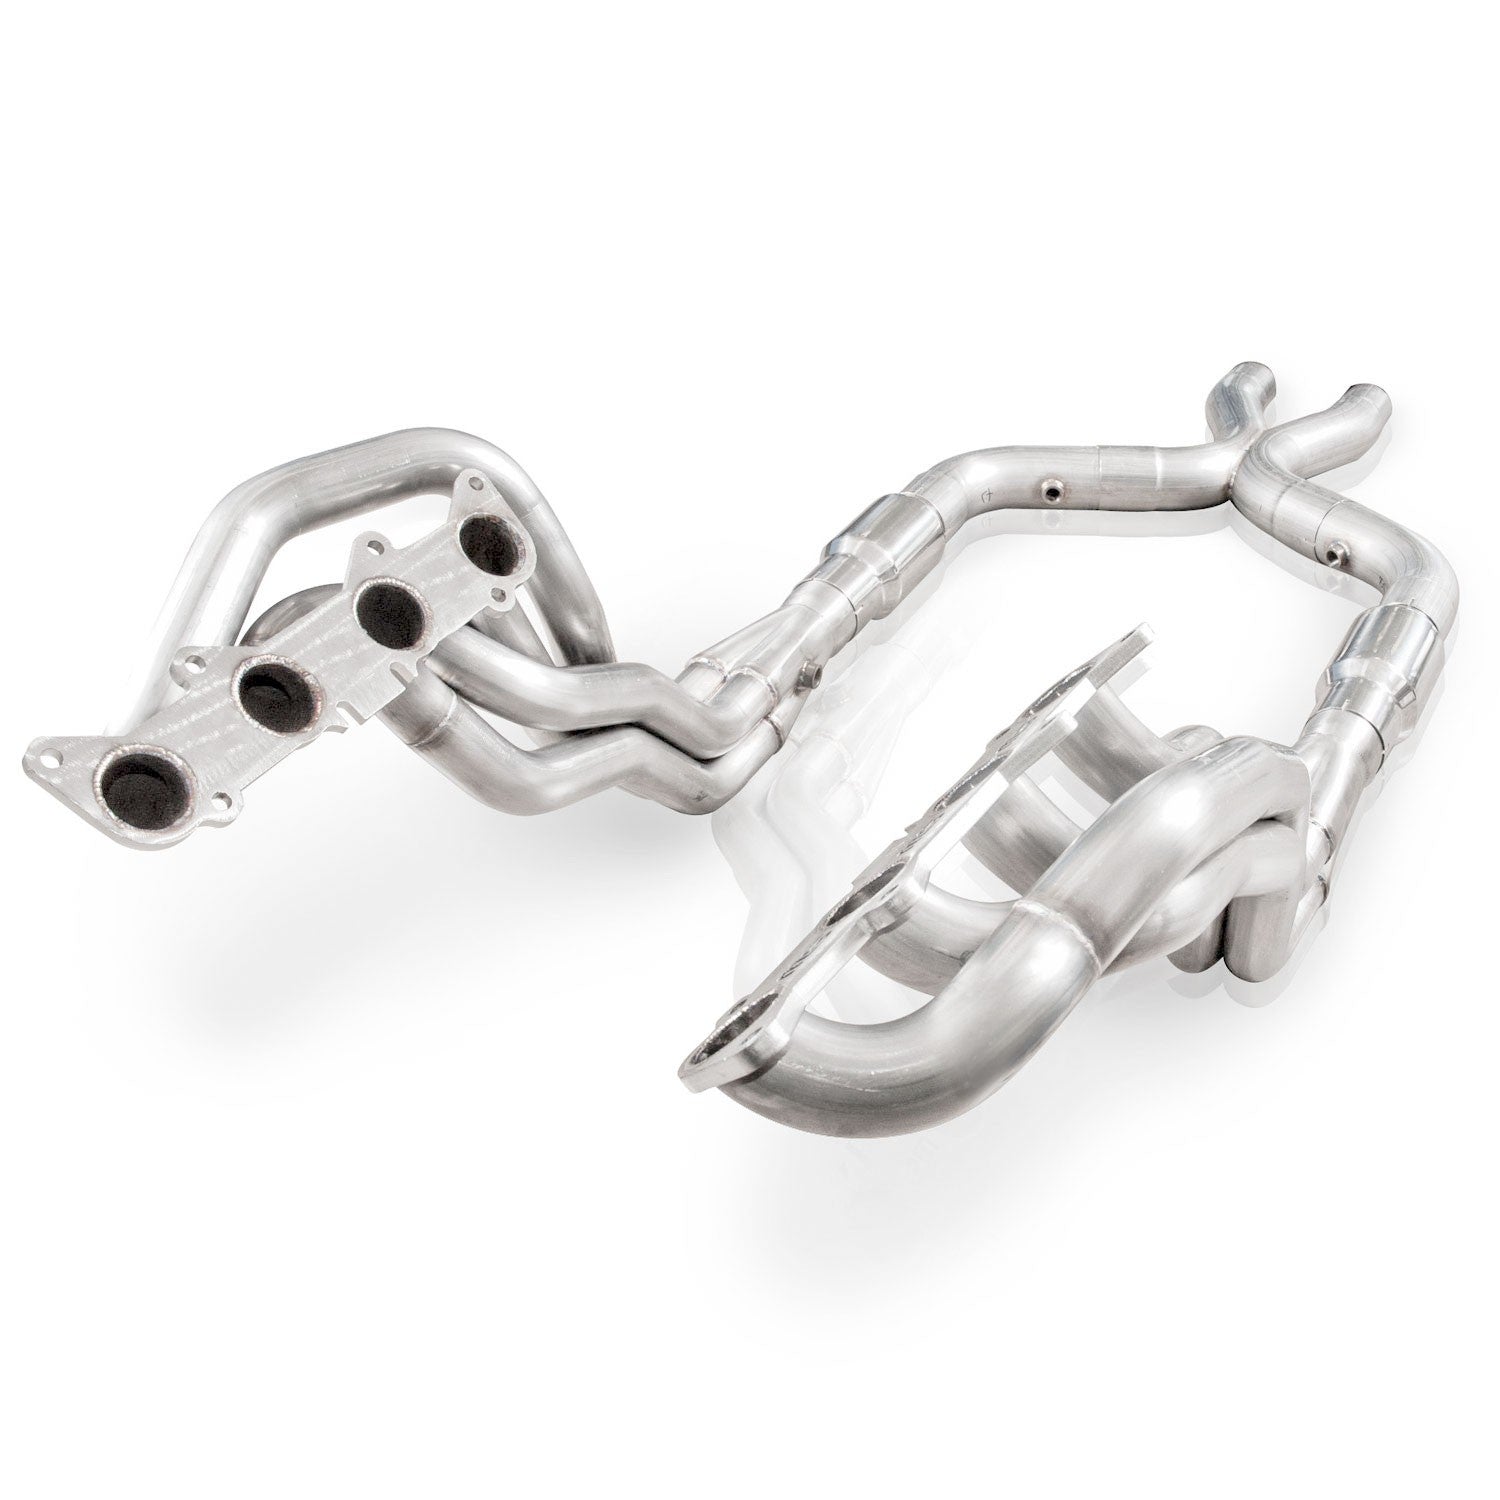 Stainless Works SP Ford Mustang GT 2011-14 Headers 1-7/8" with Catted X-Pipe SM12HCATX